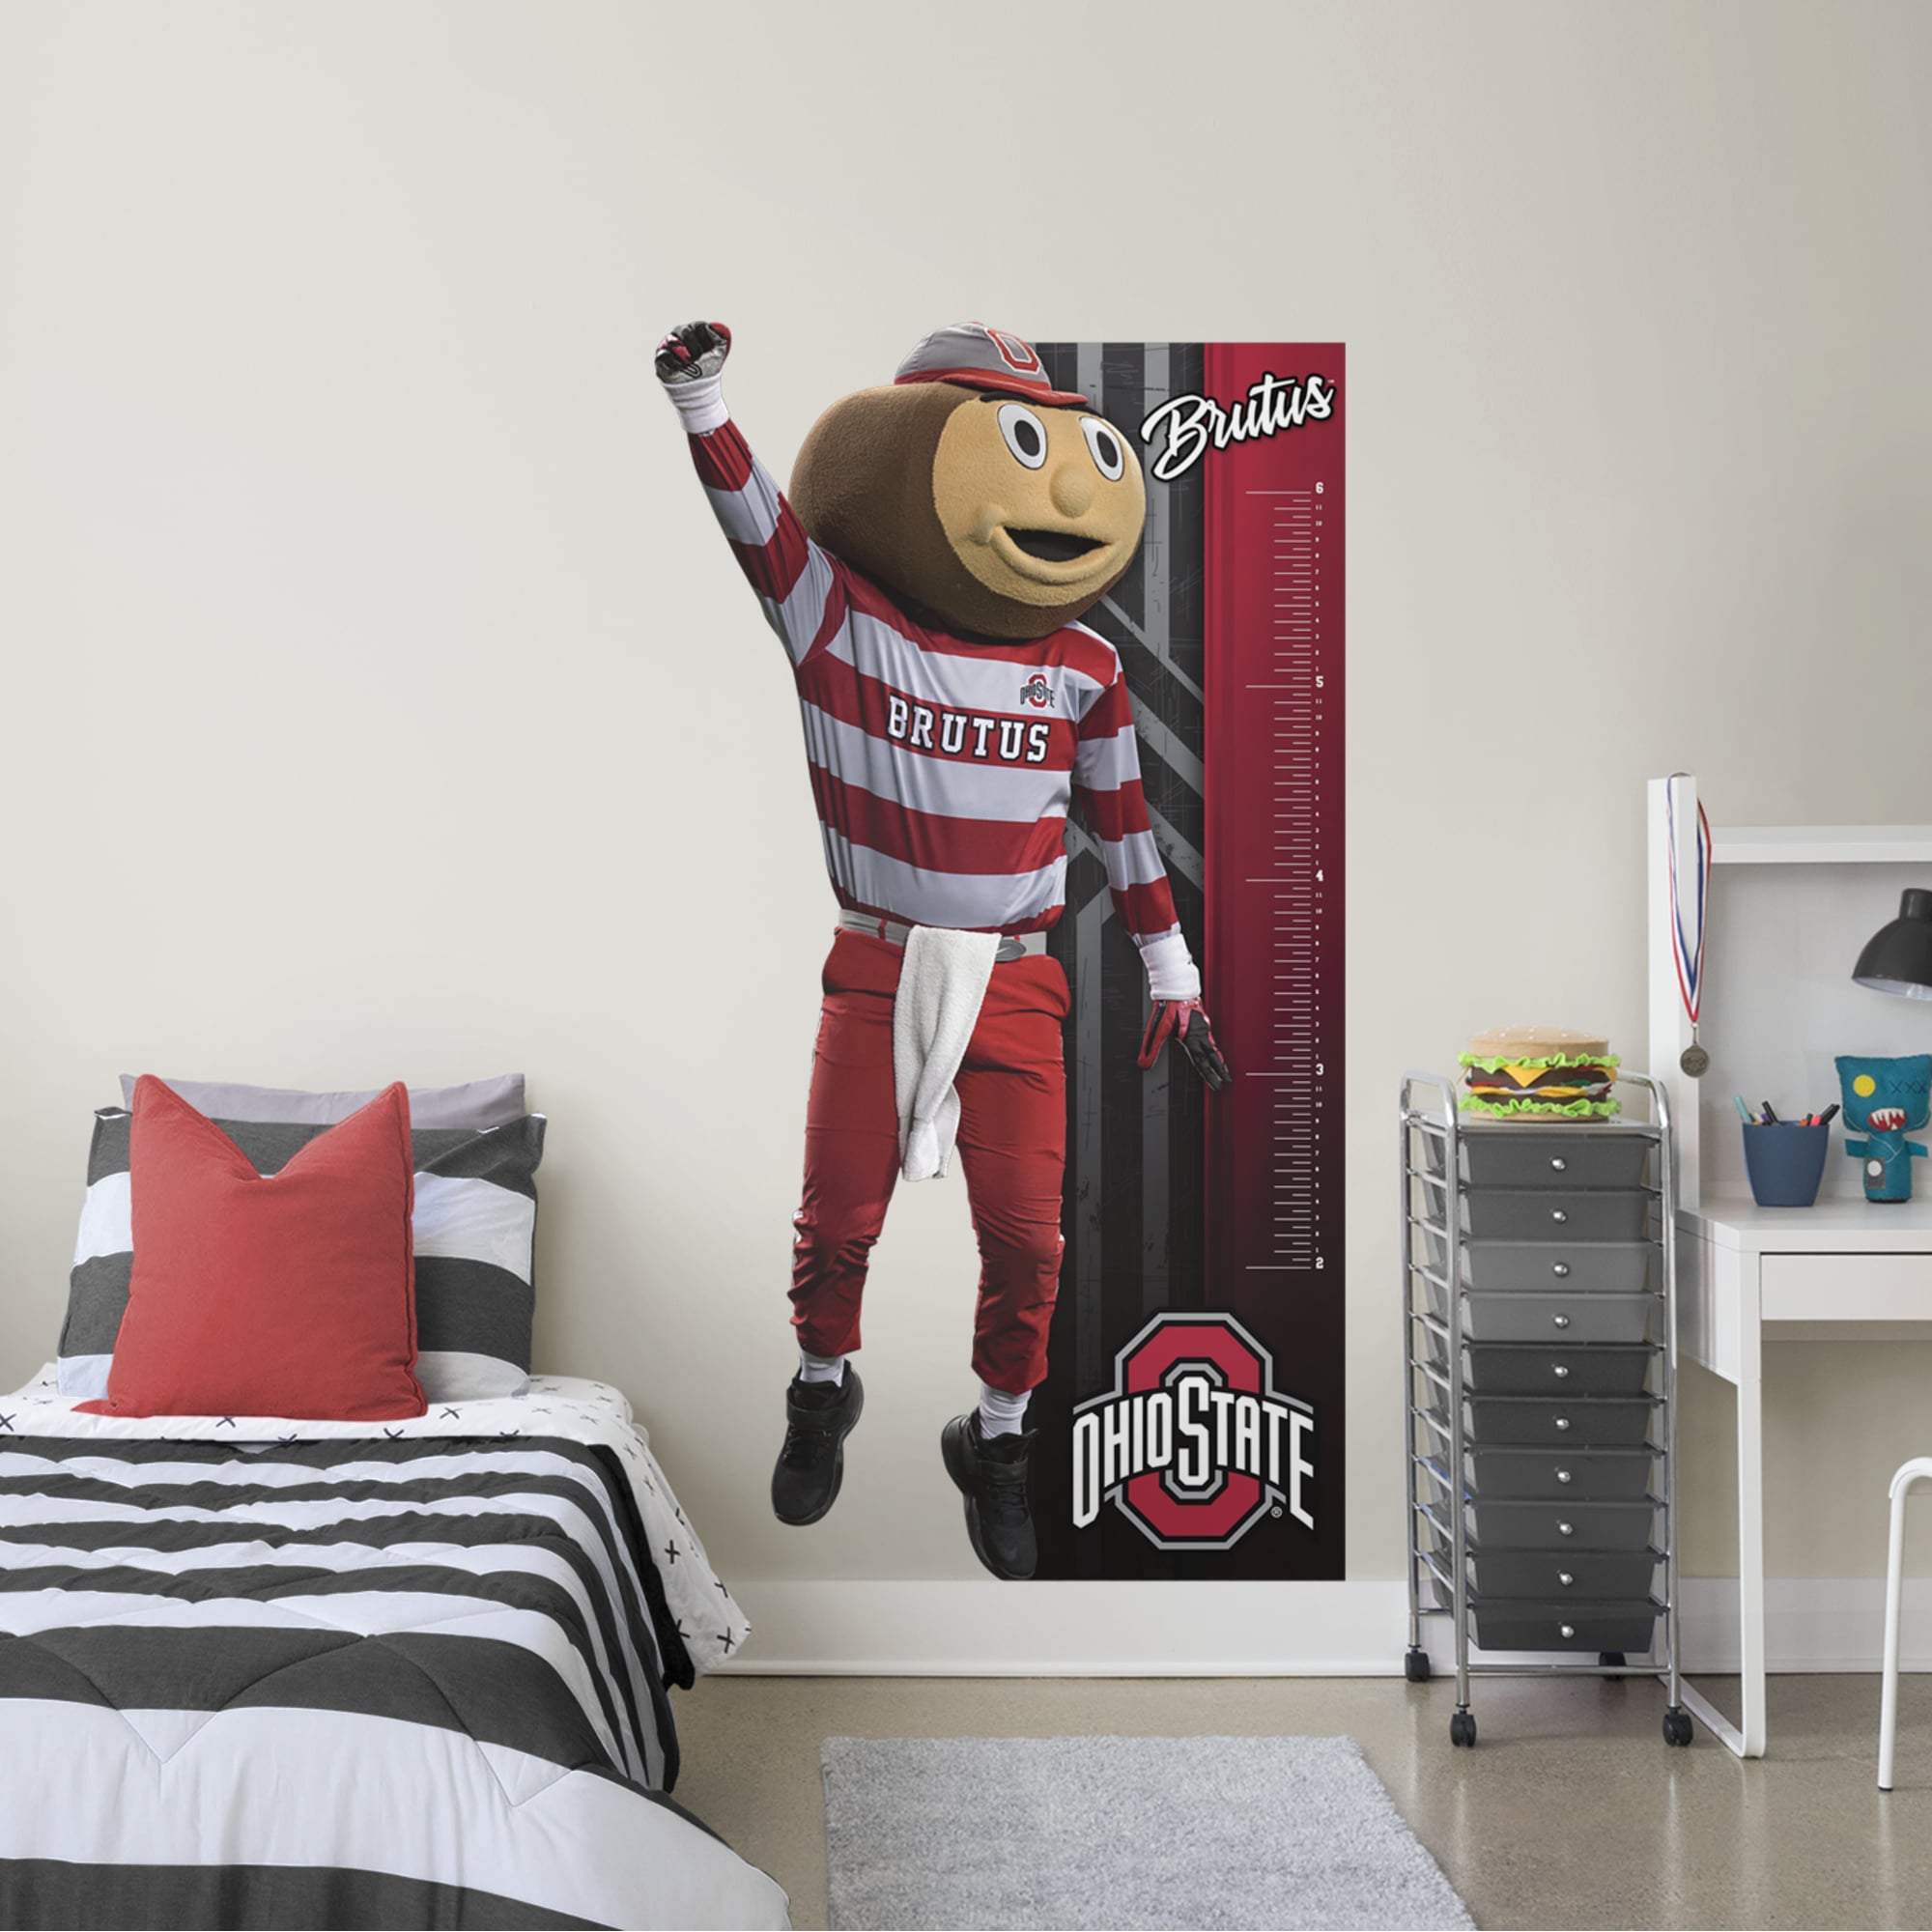 Ohio State Buckeyes: Brutus Buckeye Mascot Growth Chart - Officially Licensed Removable Wall Decal 43.0"W x 78.0"H by Fathead |